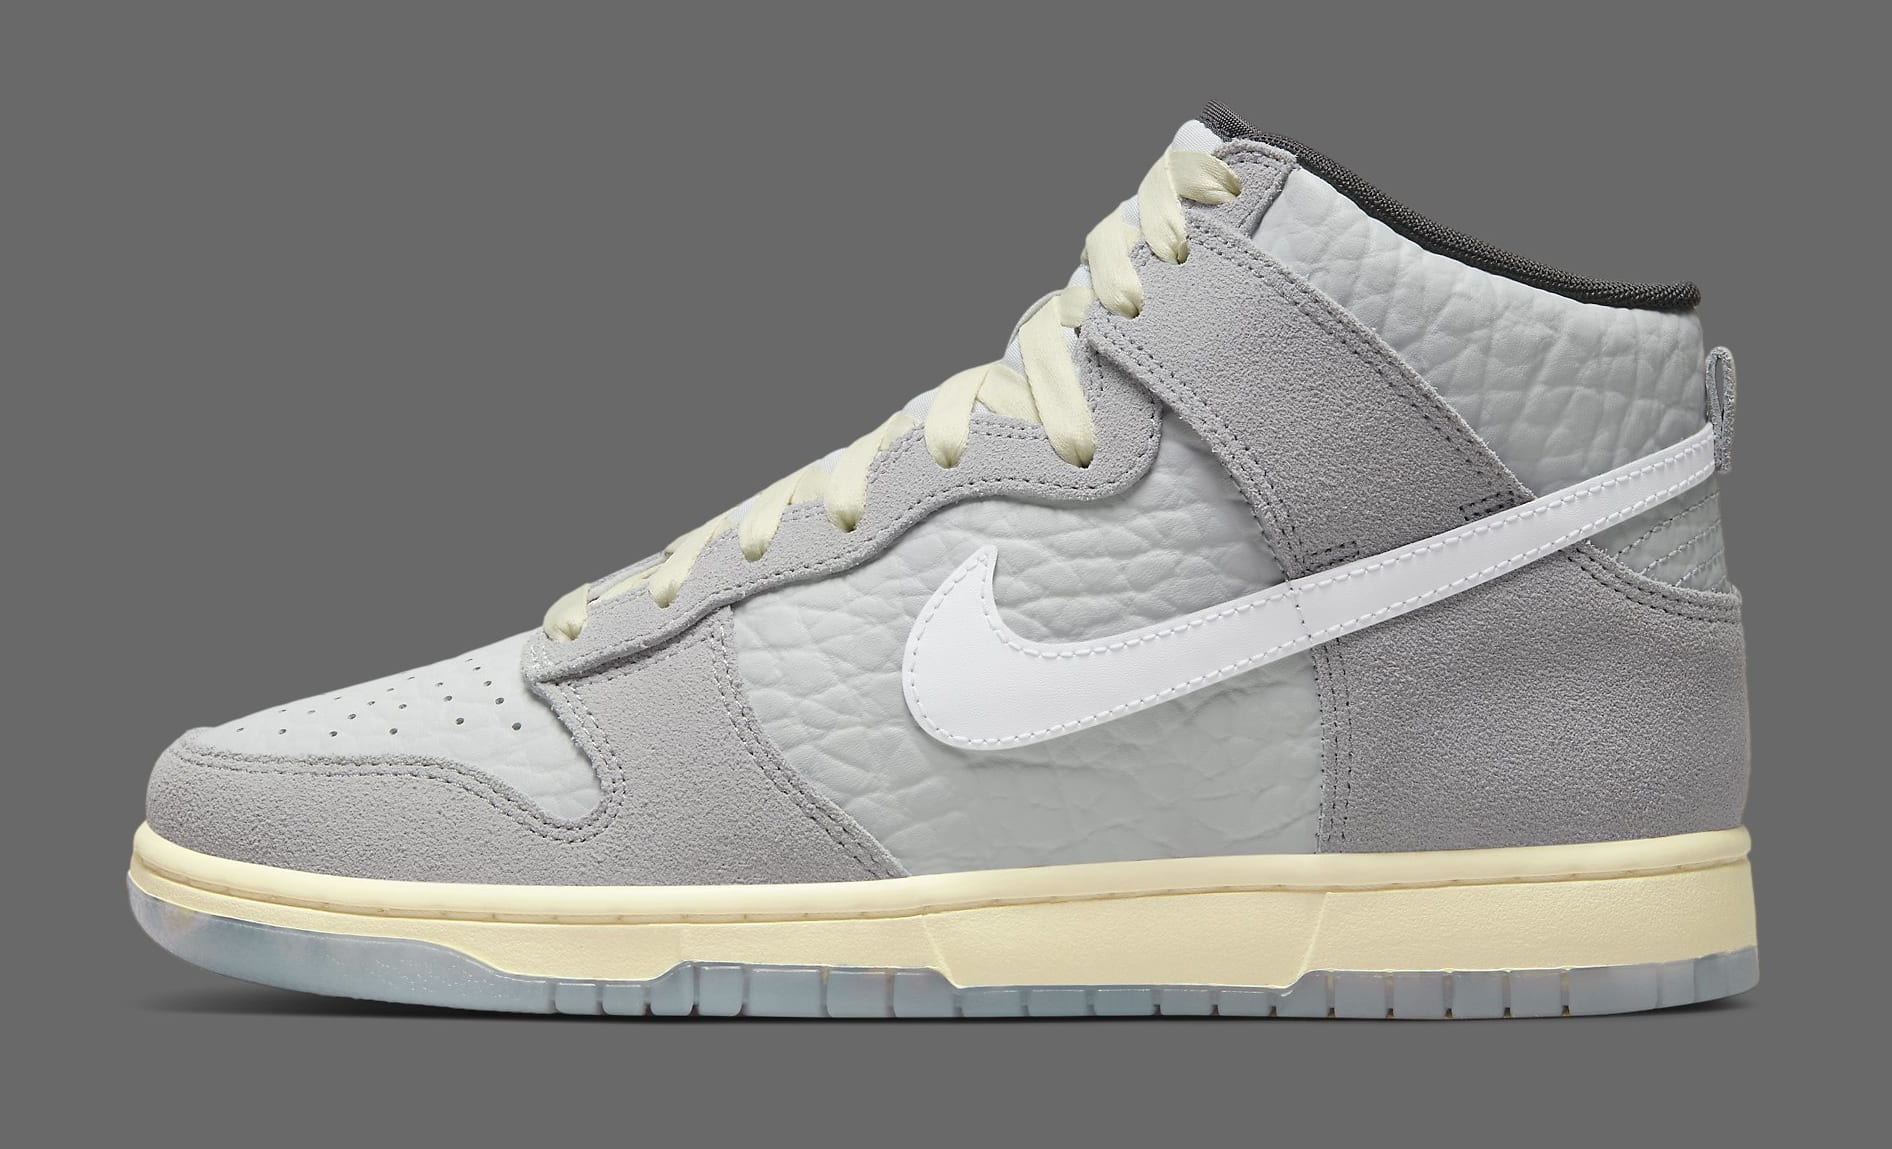 Nike Dunk High 'Wolf Grey' DR8753 077 Lateral